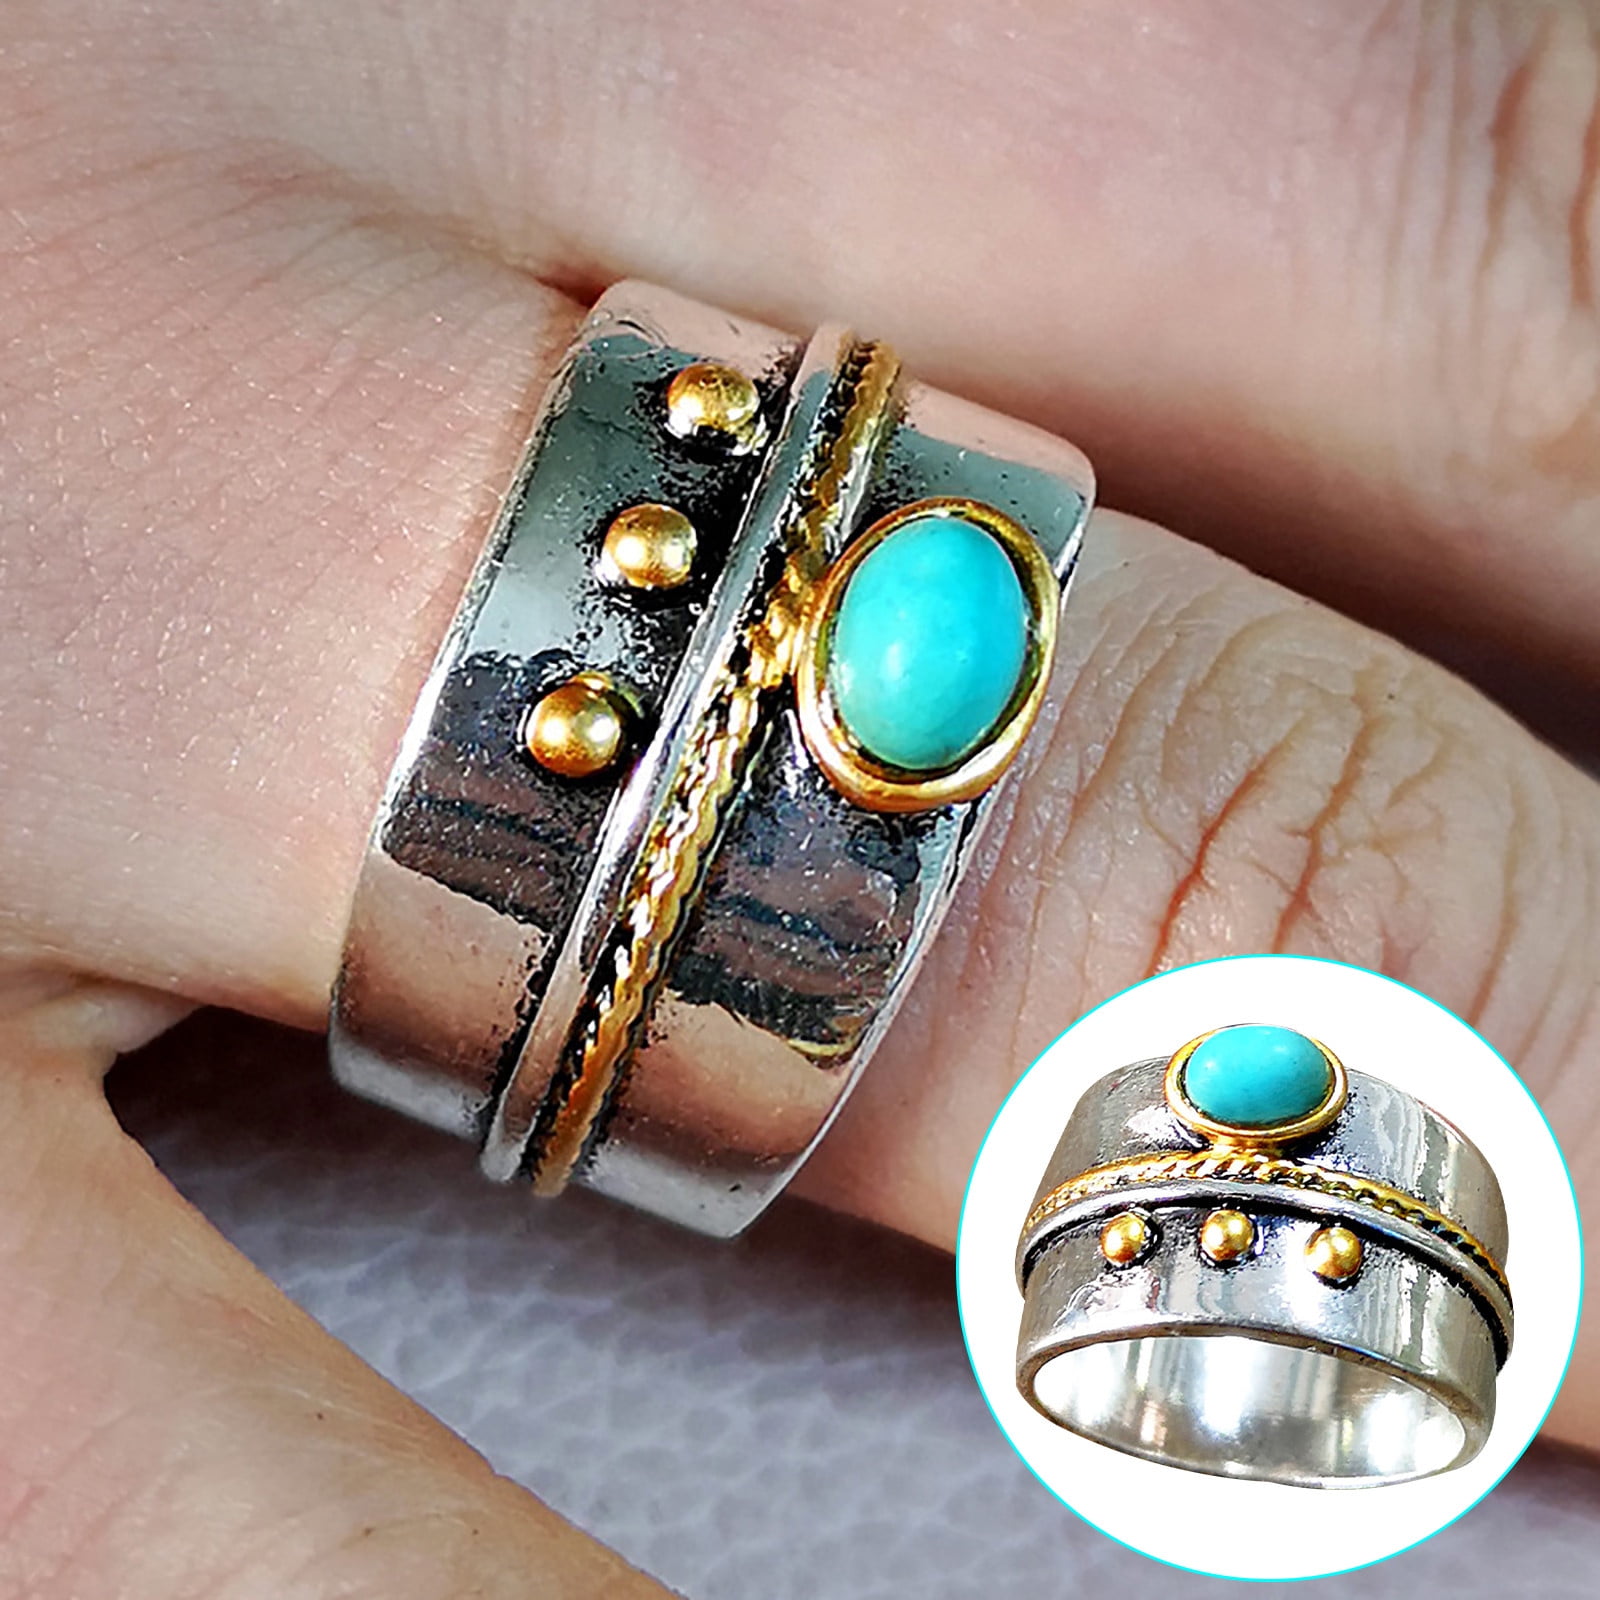 Retro 925 Silver Ring for Women Turquoise Rings Handmade Carved Jewelry SZ 6-10 